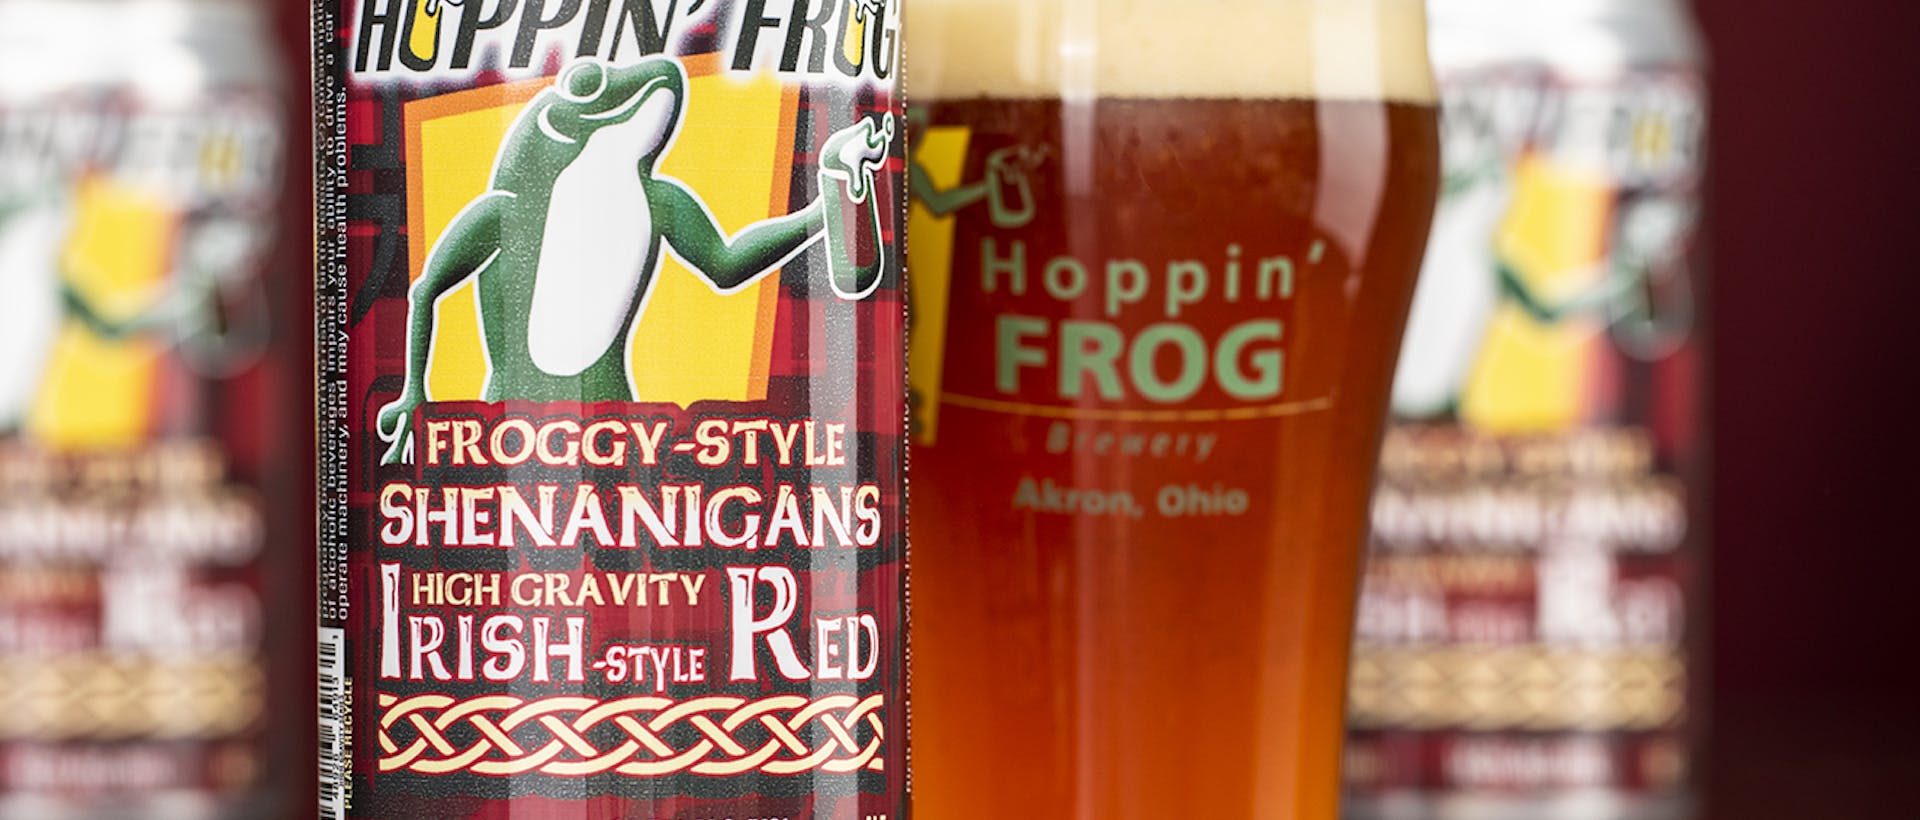 HF_Froggy Style Shenanigans Irish Red Ale_close up straight on view 2_2023 copy